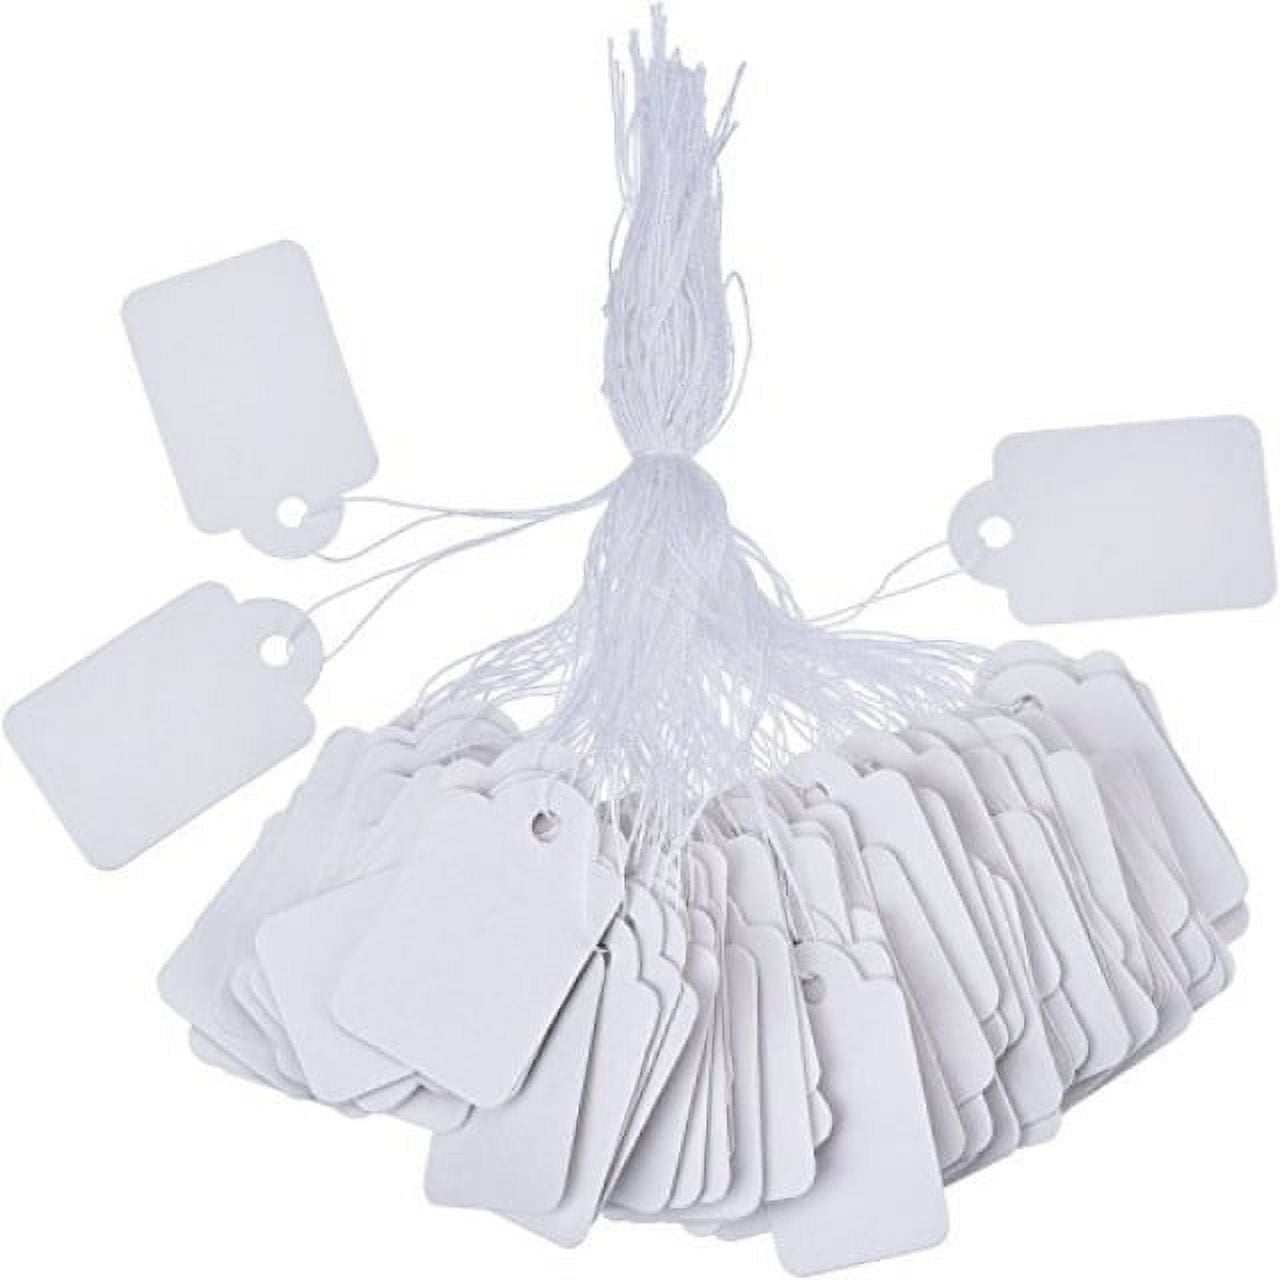 1000pcs Price Tags Clothing Tags Merchandise Marking Tags Display